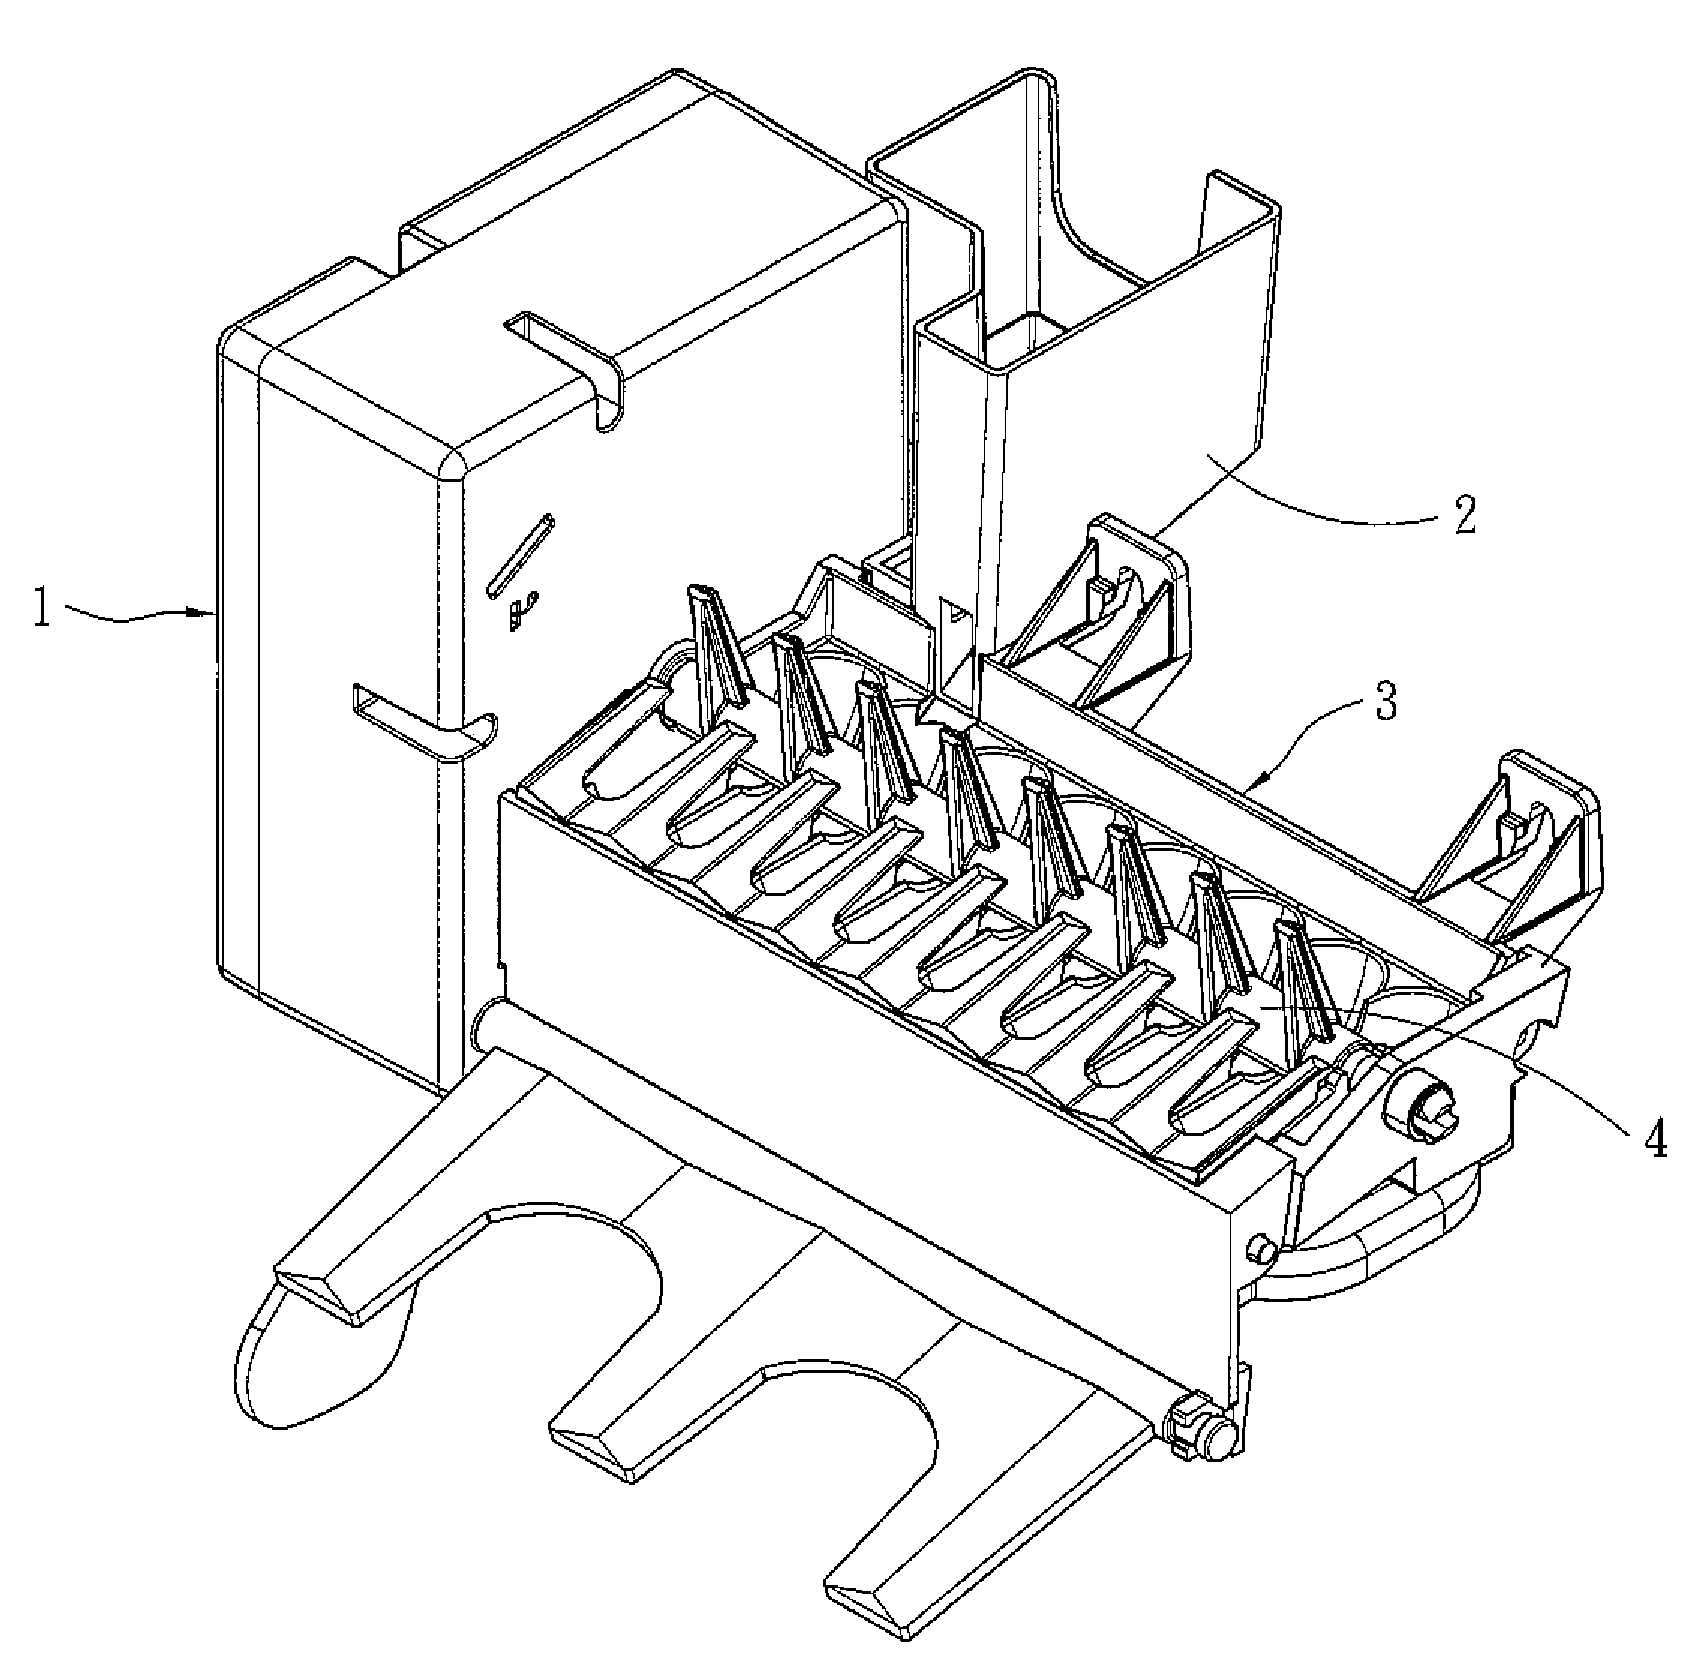 Ice maker equipped with a convection fan